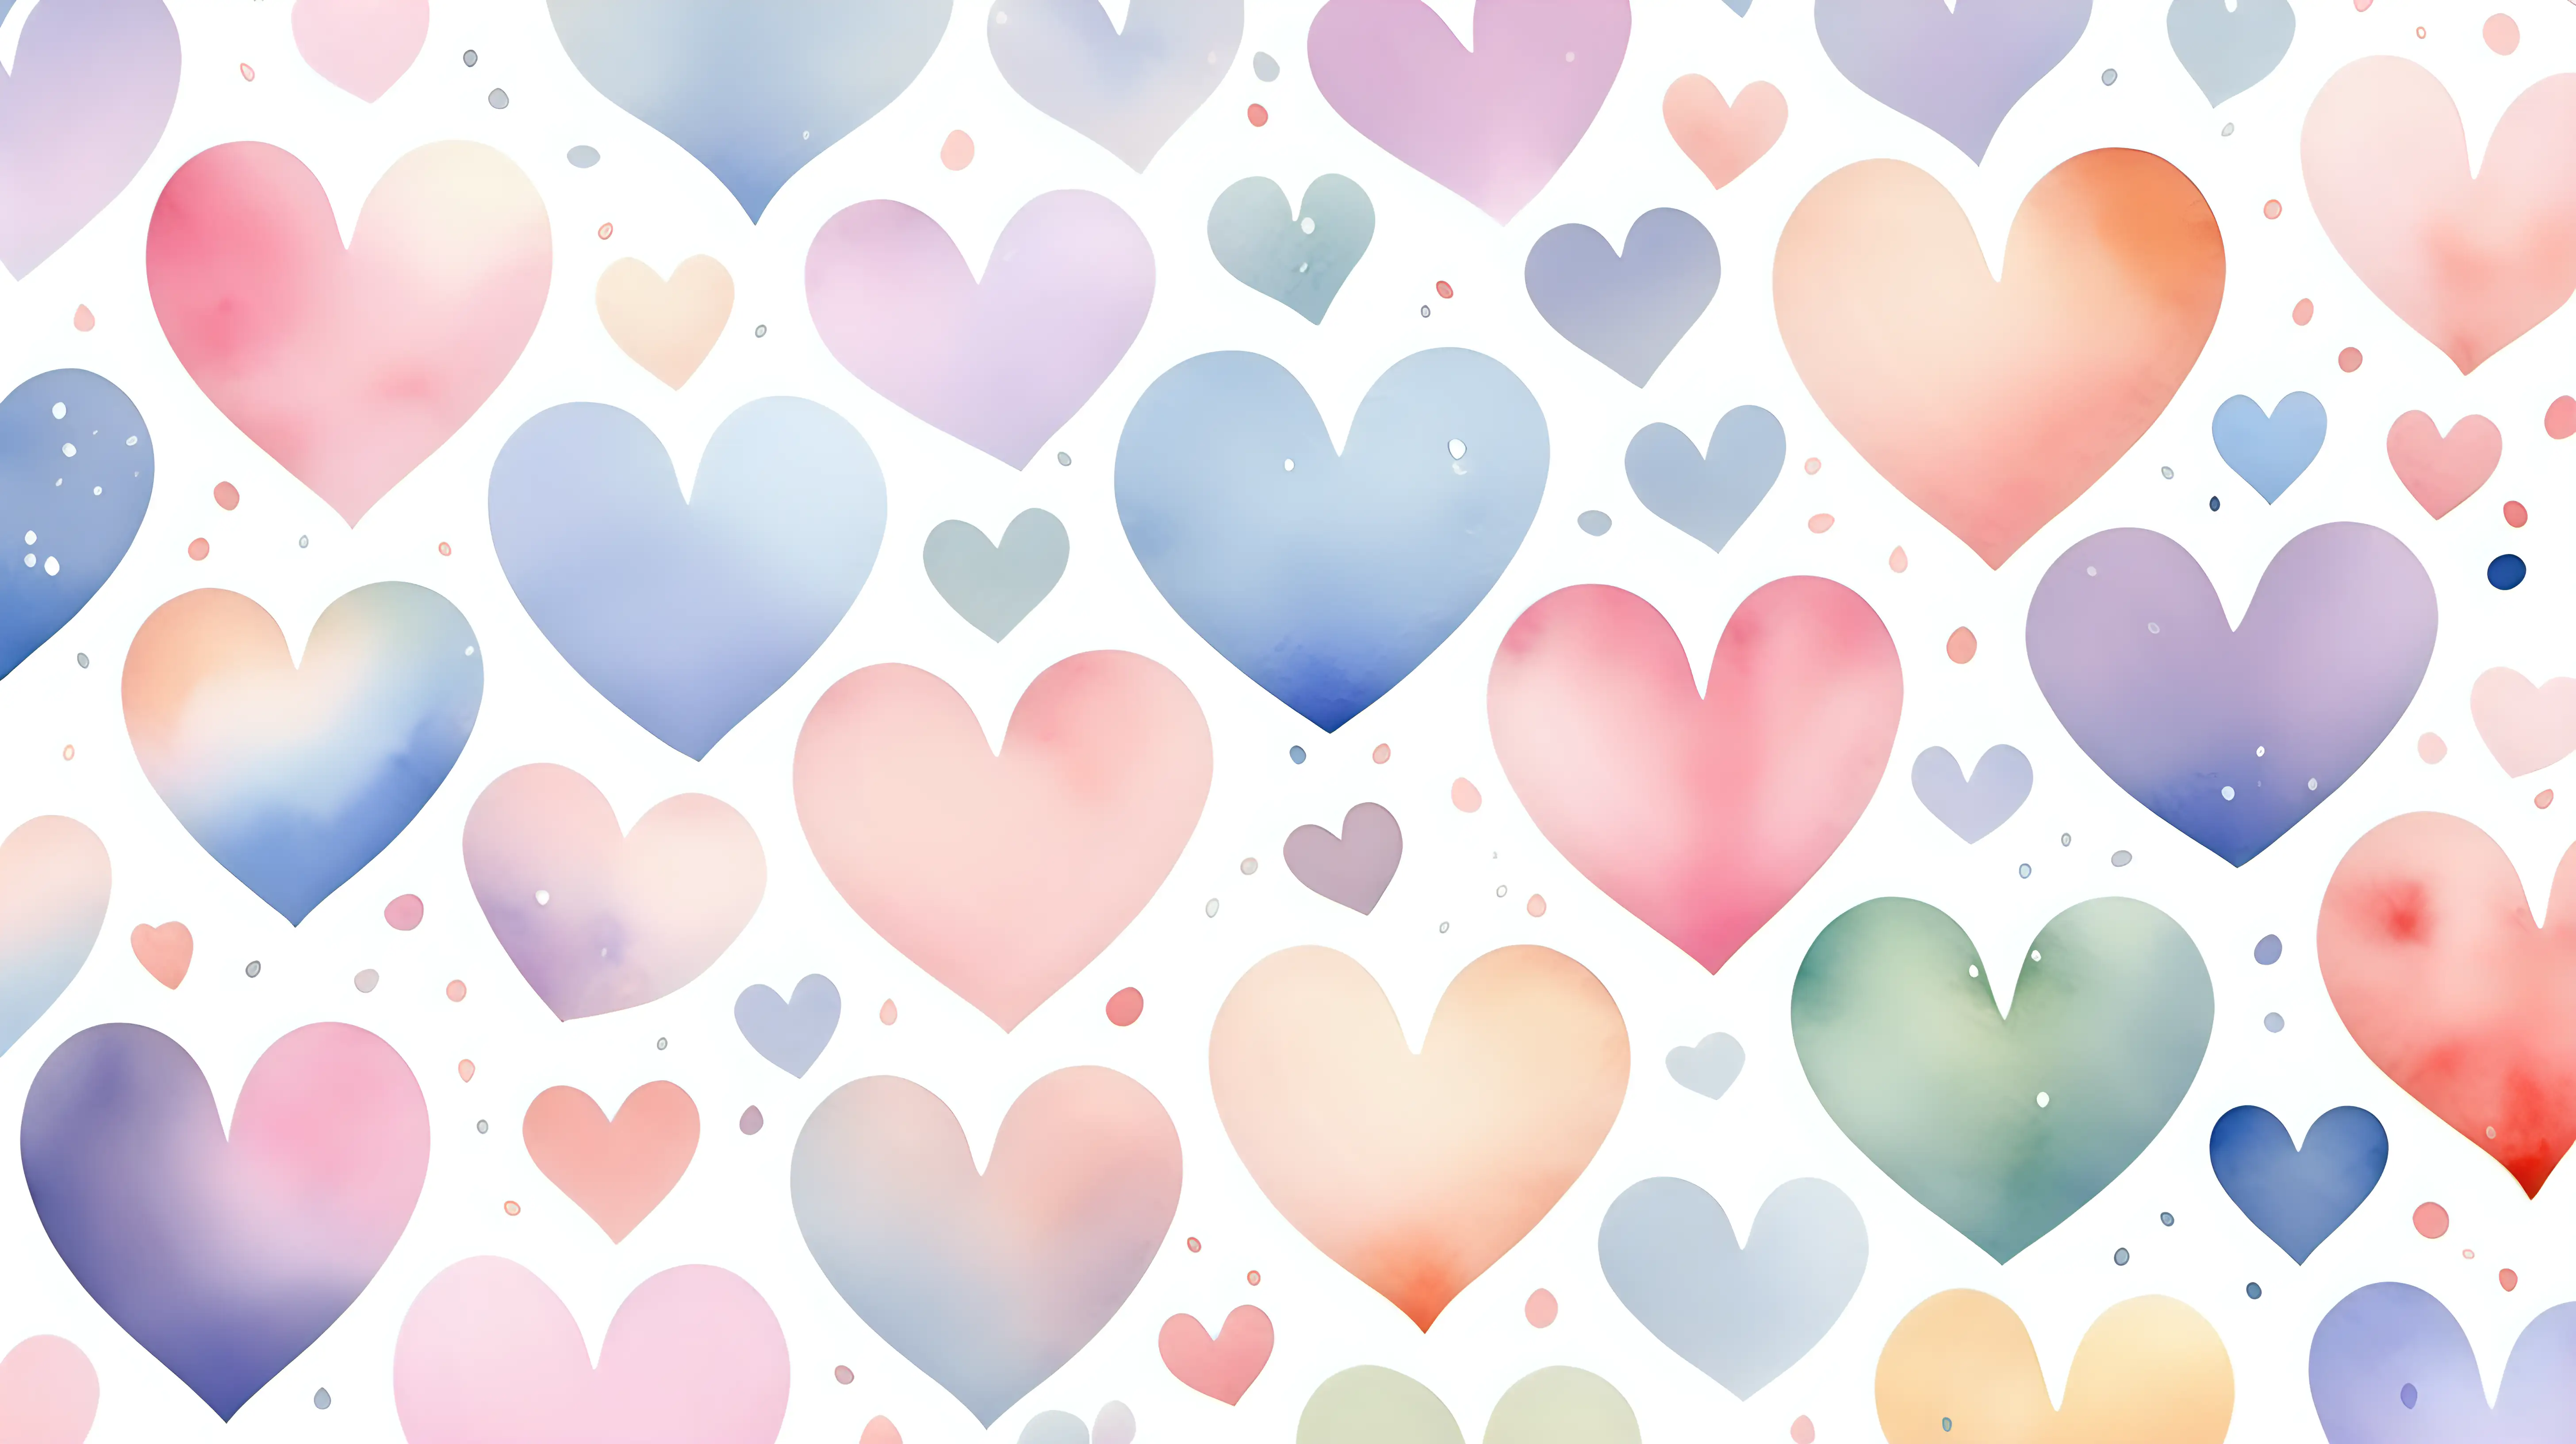 Pastel Watercolor Hearts with Delicate Paint Droplets